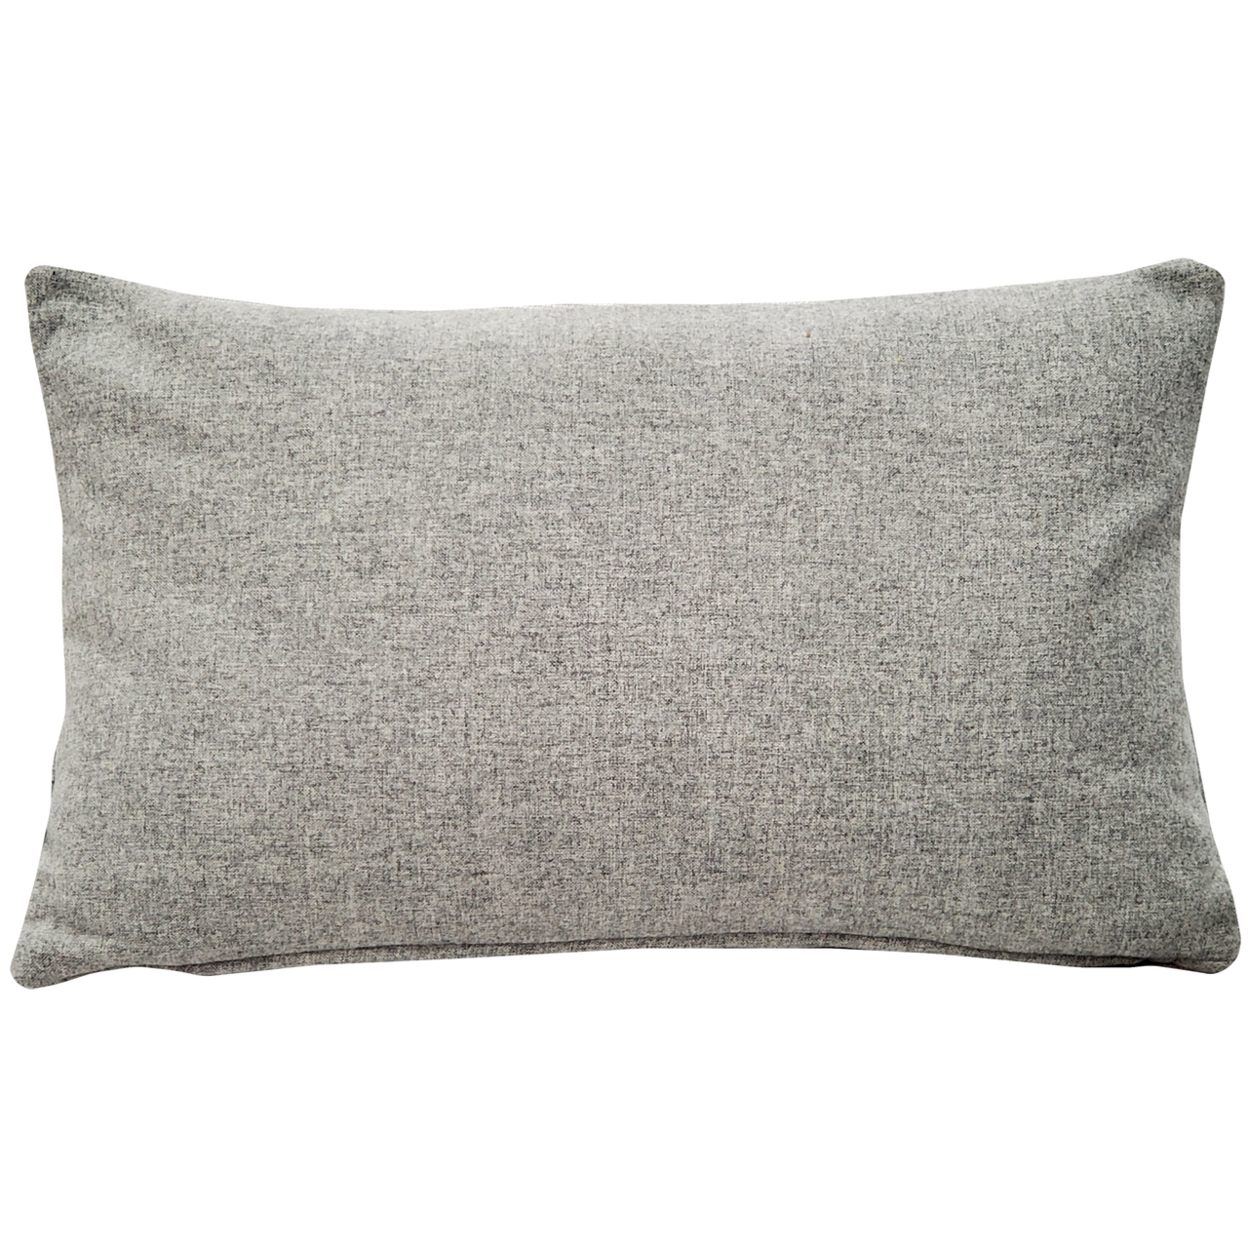 South Haven Gray Felt Coordinates Pillow 12x19 Inches Square, Complete Pillow With Polyfill Pillow Insert